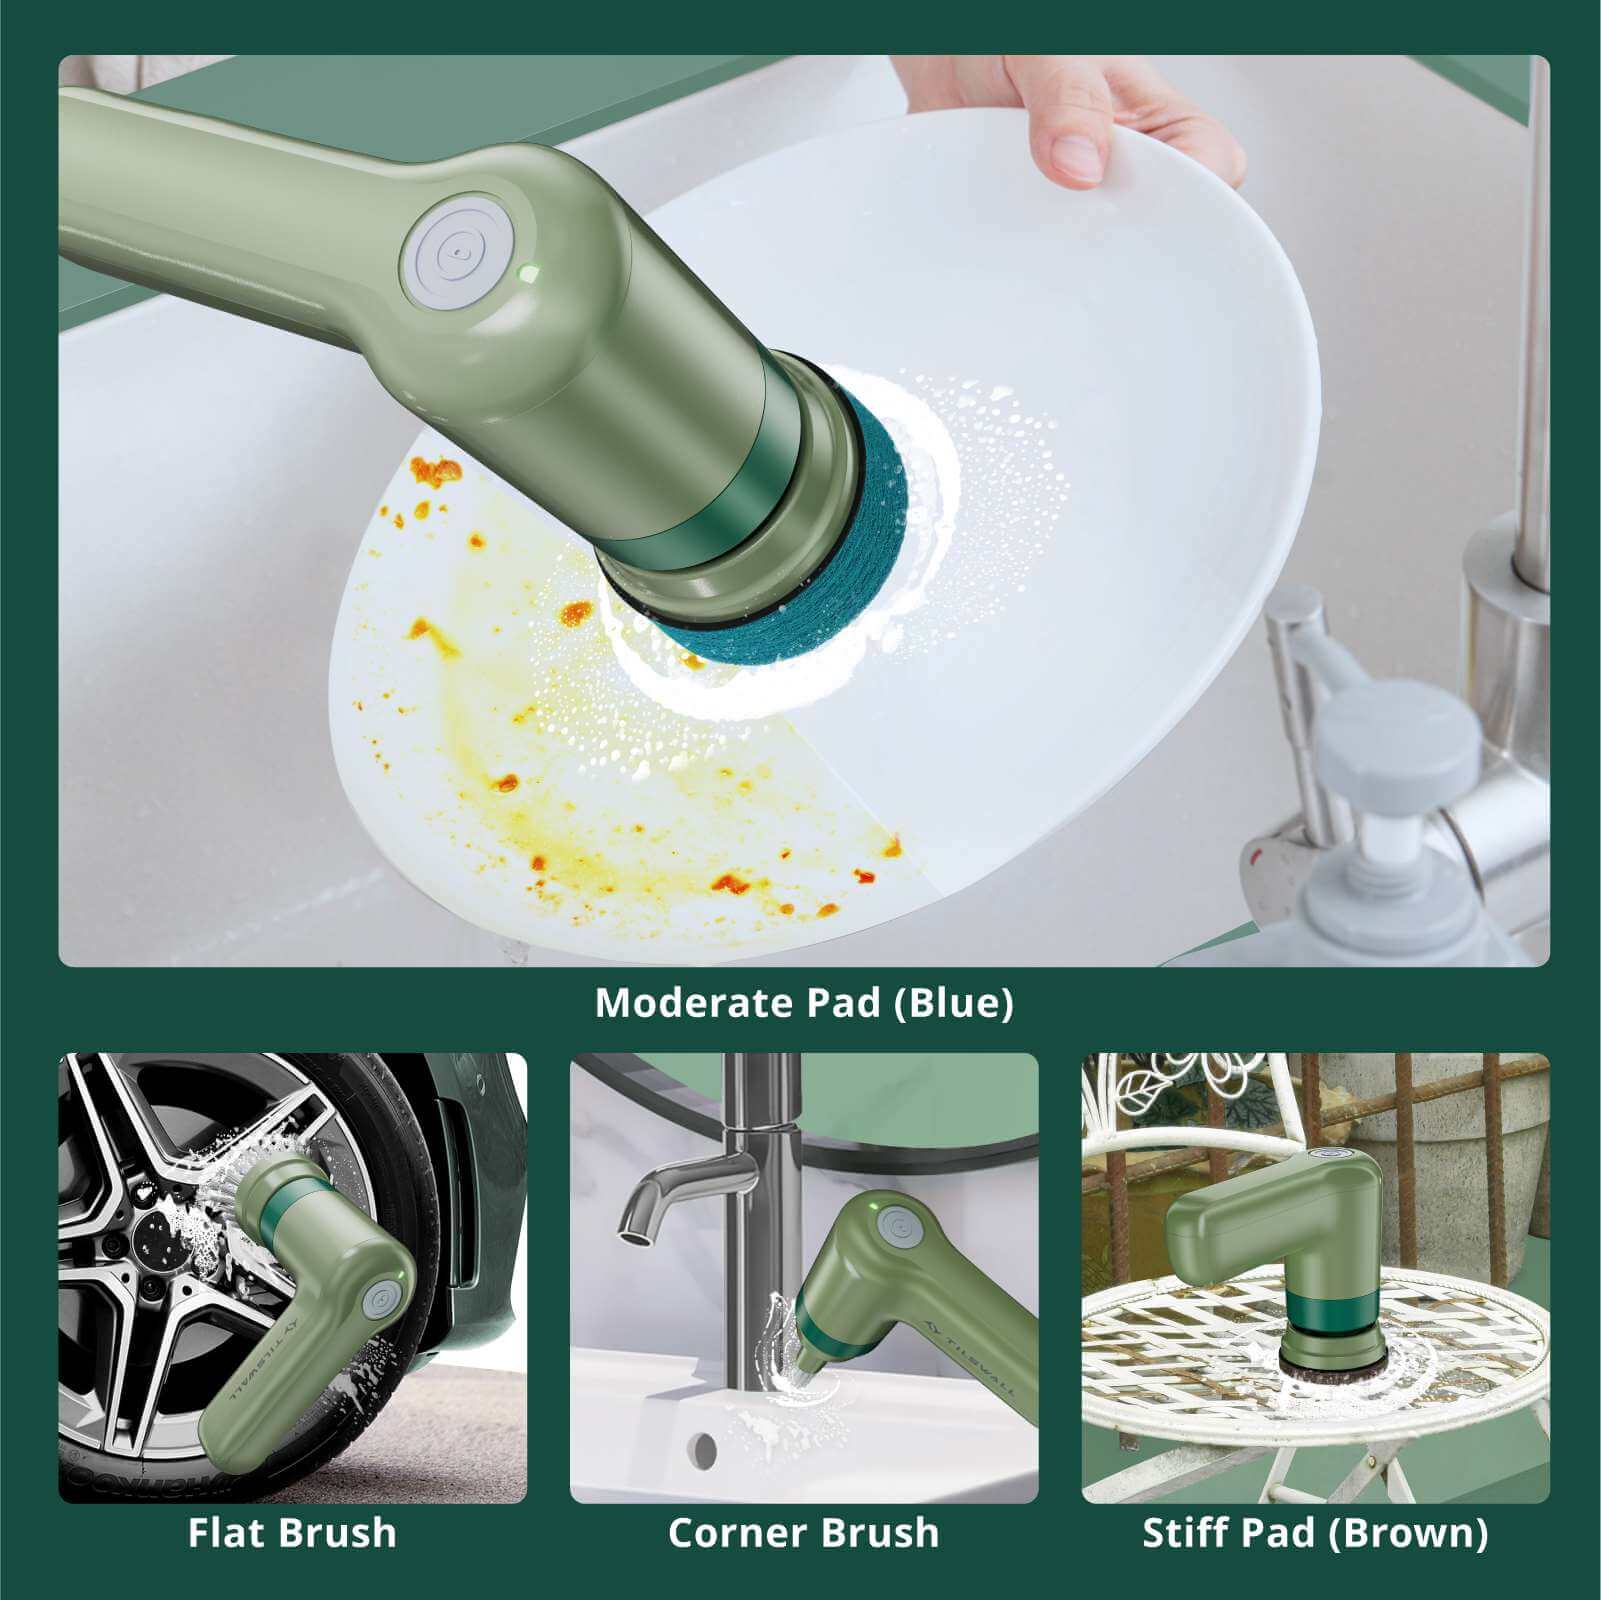 Tilswall tilswall electric spin scrubber, cordless grout shower